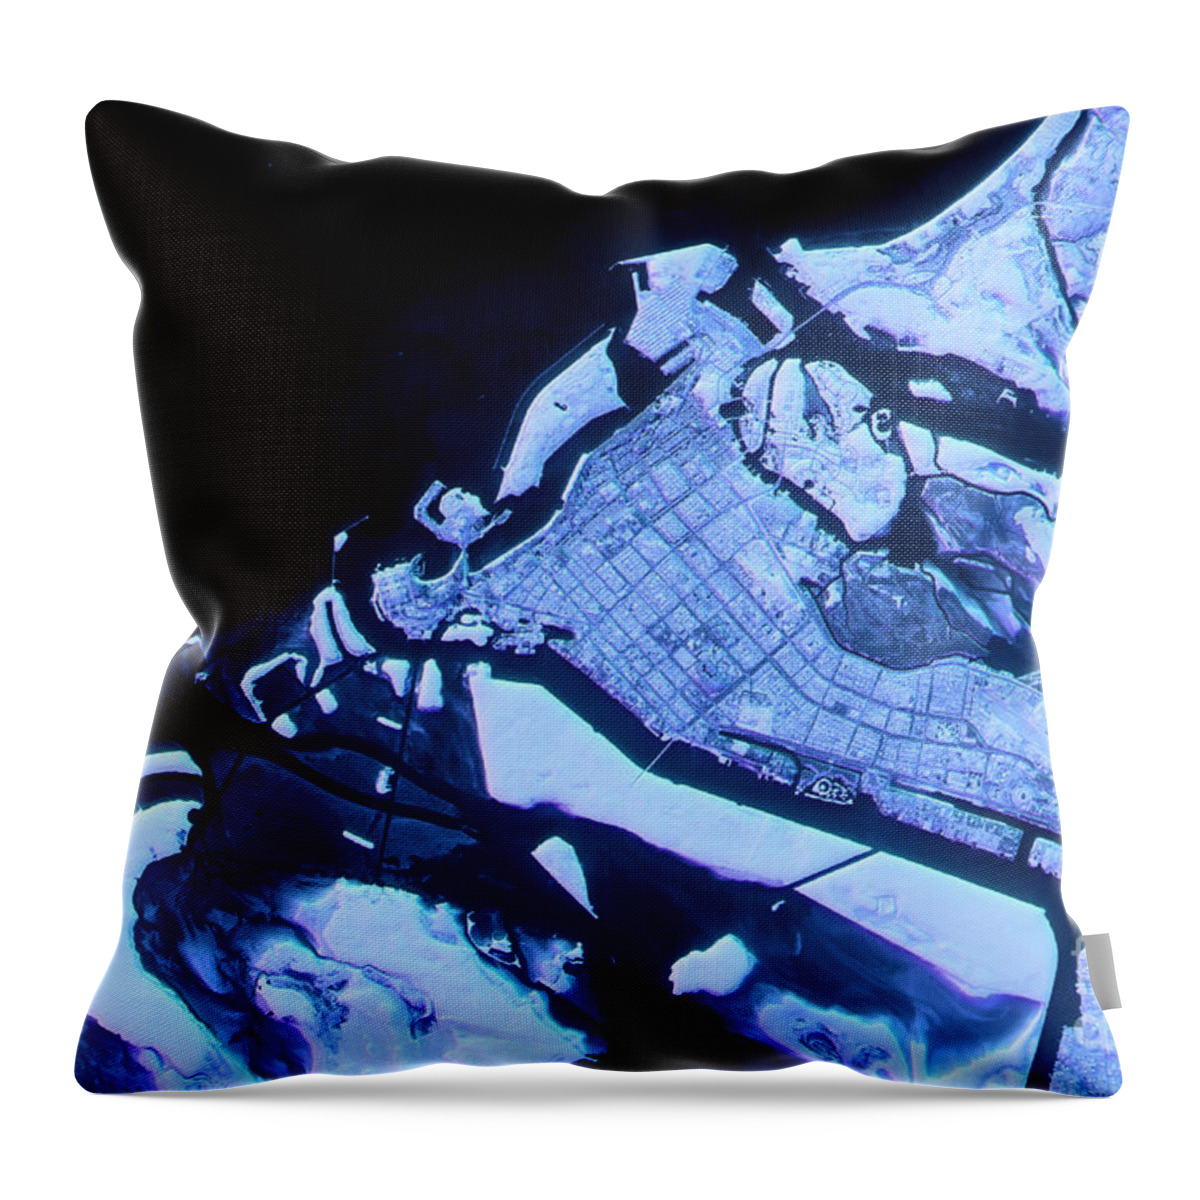 Abu Dhabi Throw Pillow featuring the digital art Abu Dhabi Abstract City Map Satellite Image Blue Detail by Frank Ramspott